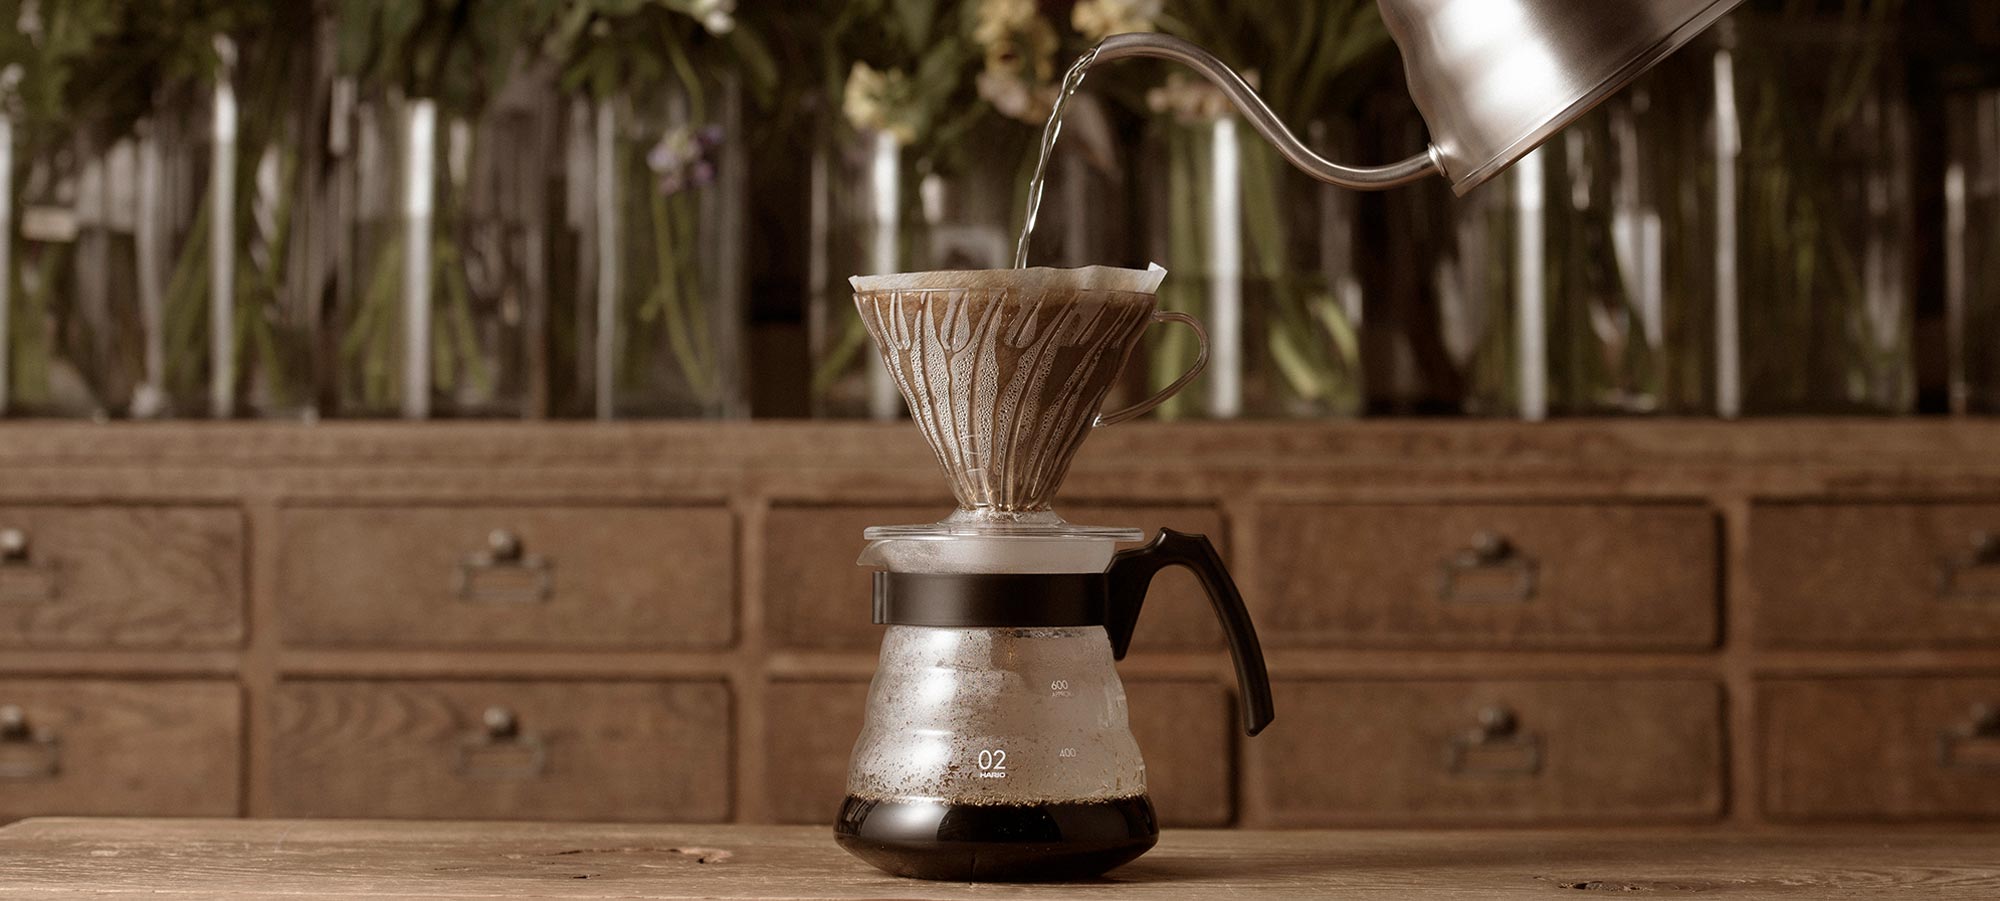 king carlos coffee roasters sydney v60 pour over coffee